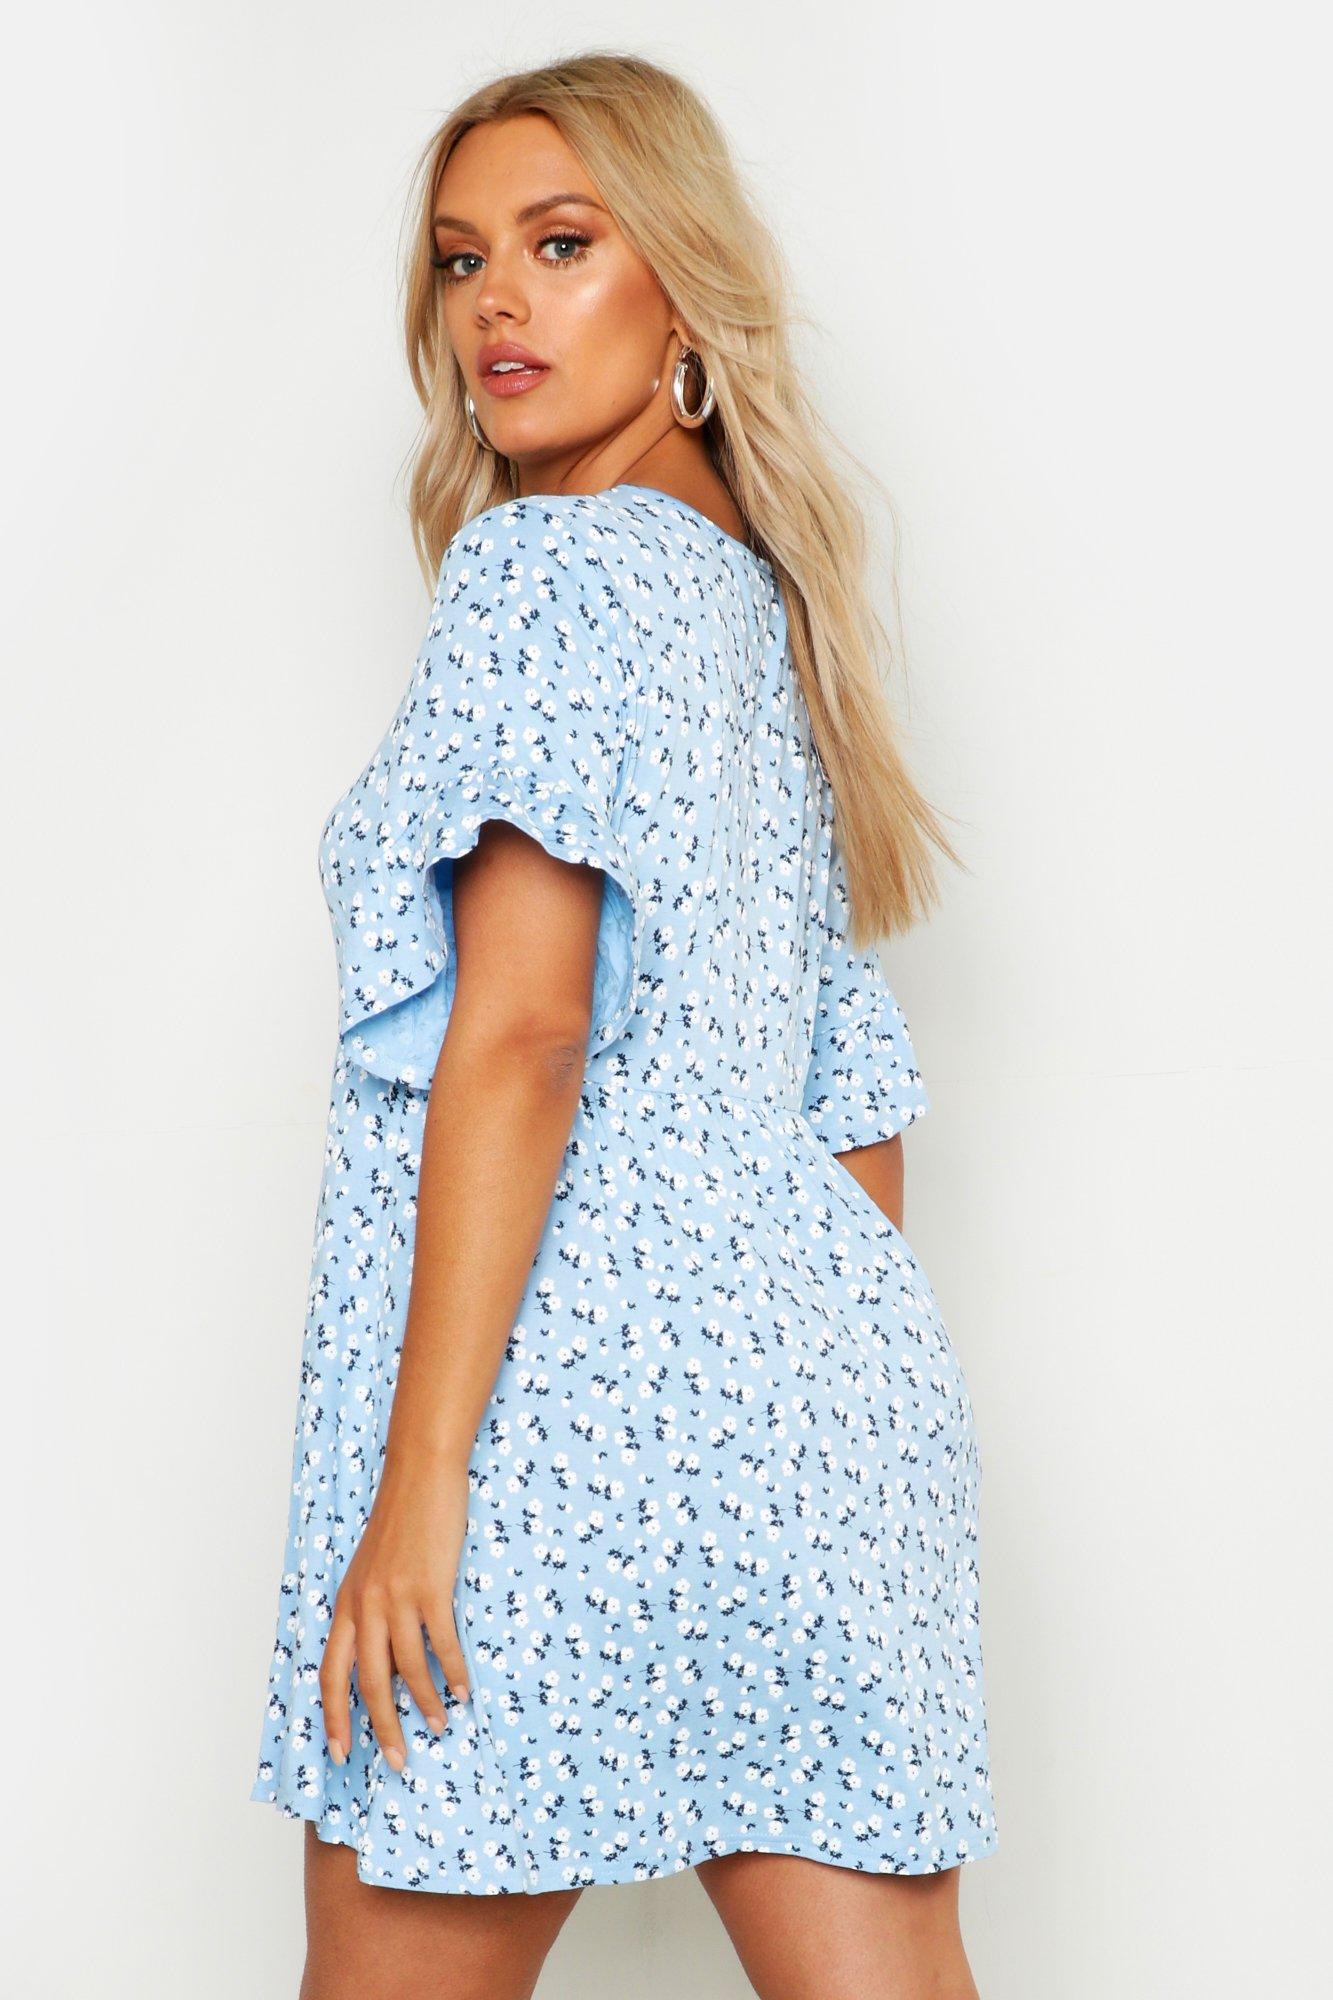 Boohoo Plus Ditsy Floral Smock Dress in Sky (Blue) - Lyst